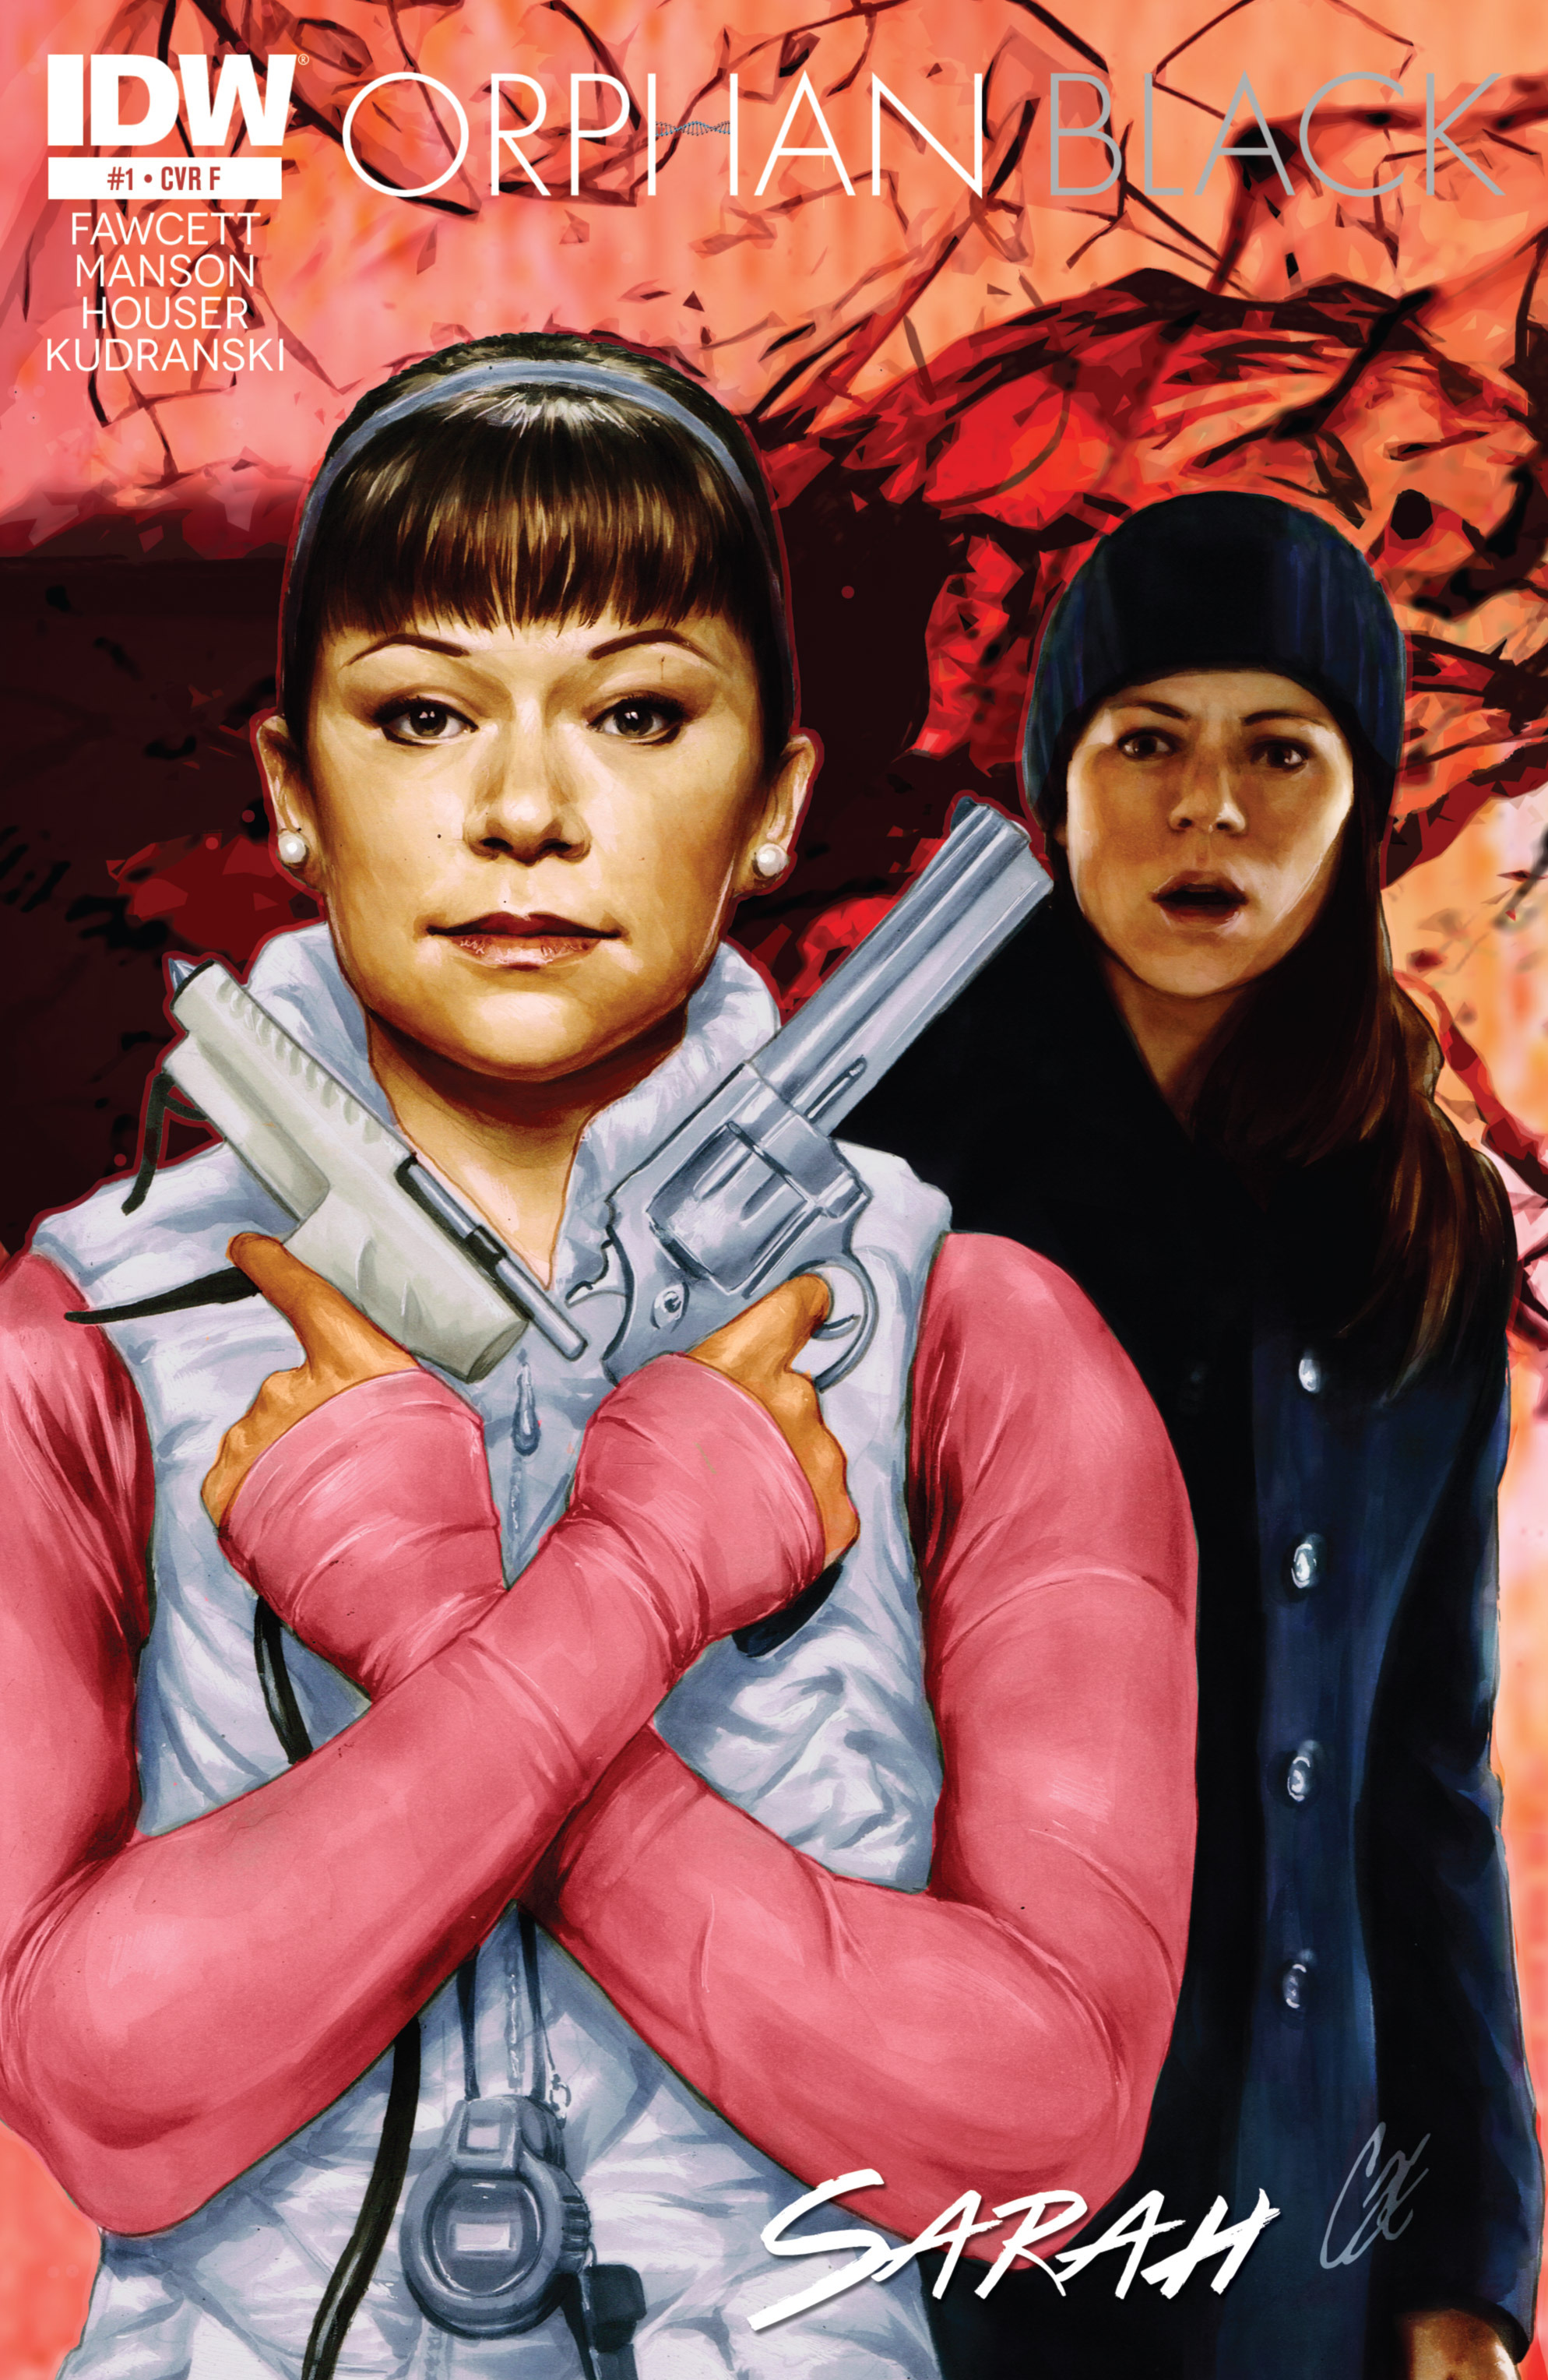 Read online Orphan Black comic -  Issue #1 - 6